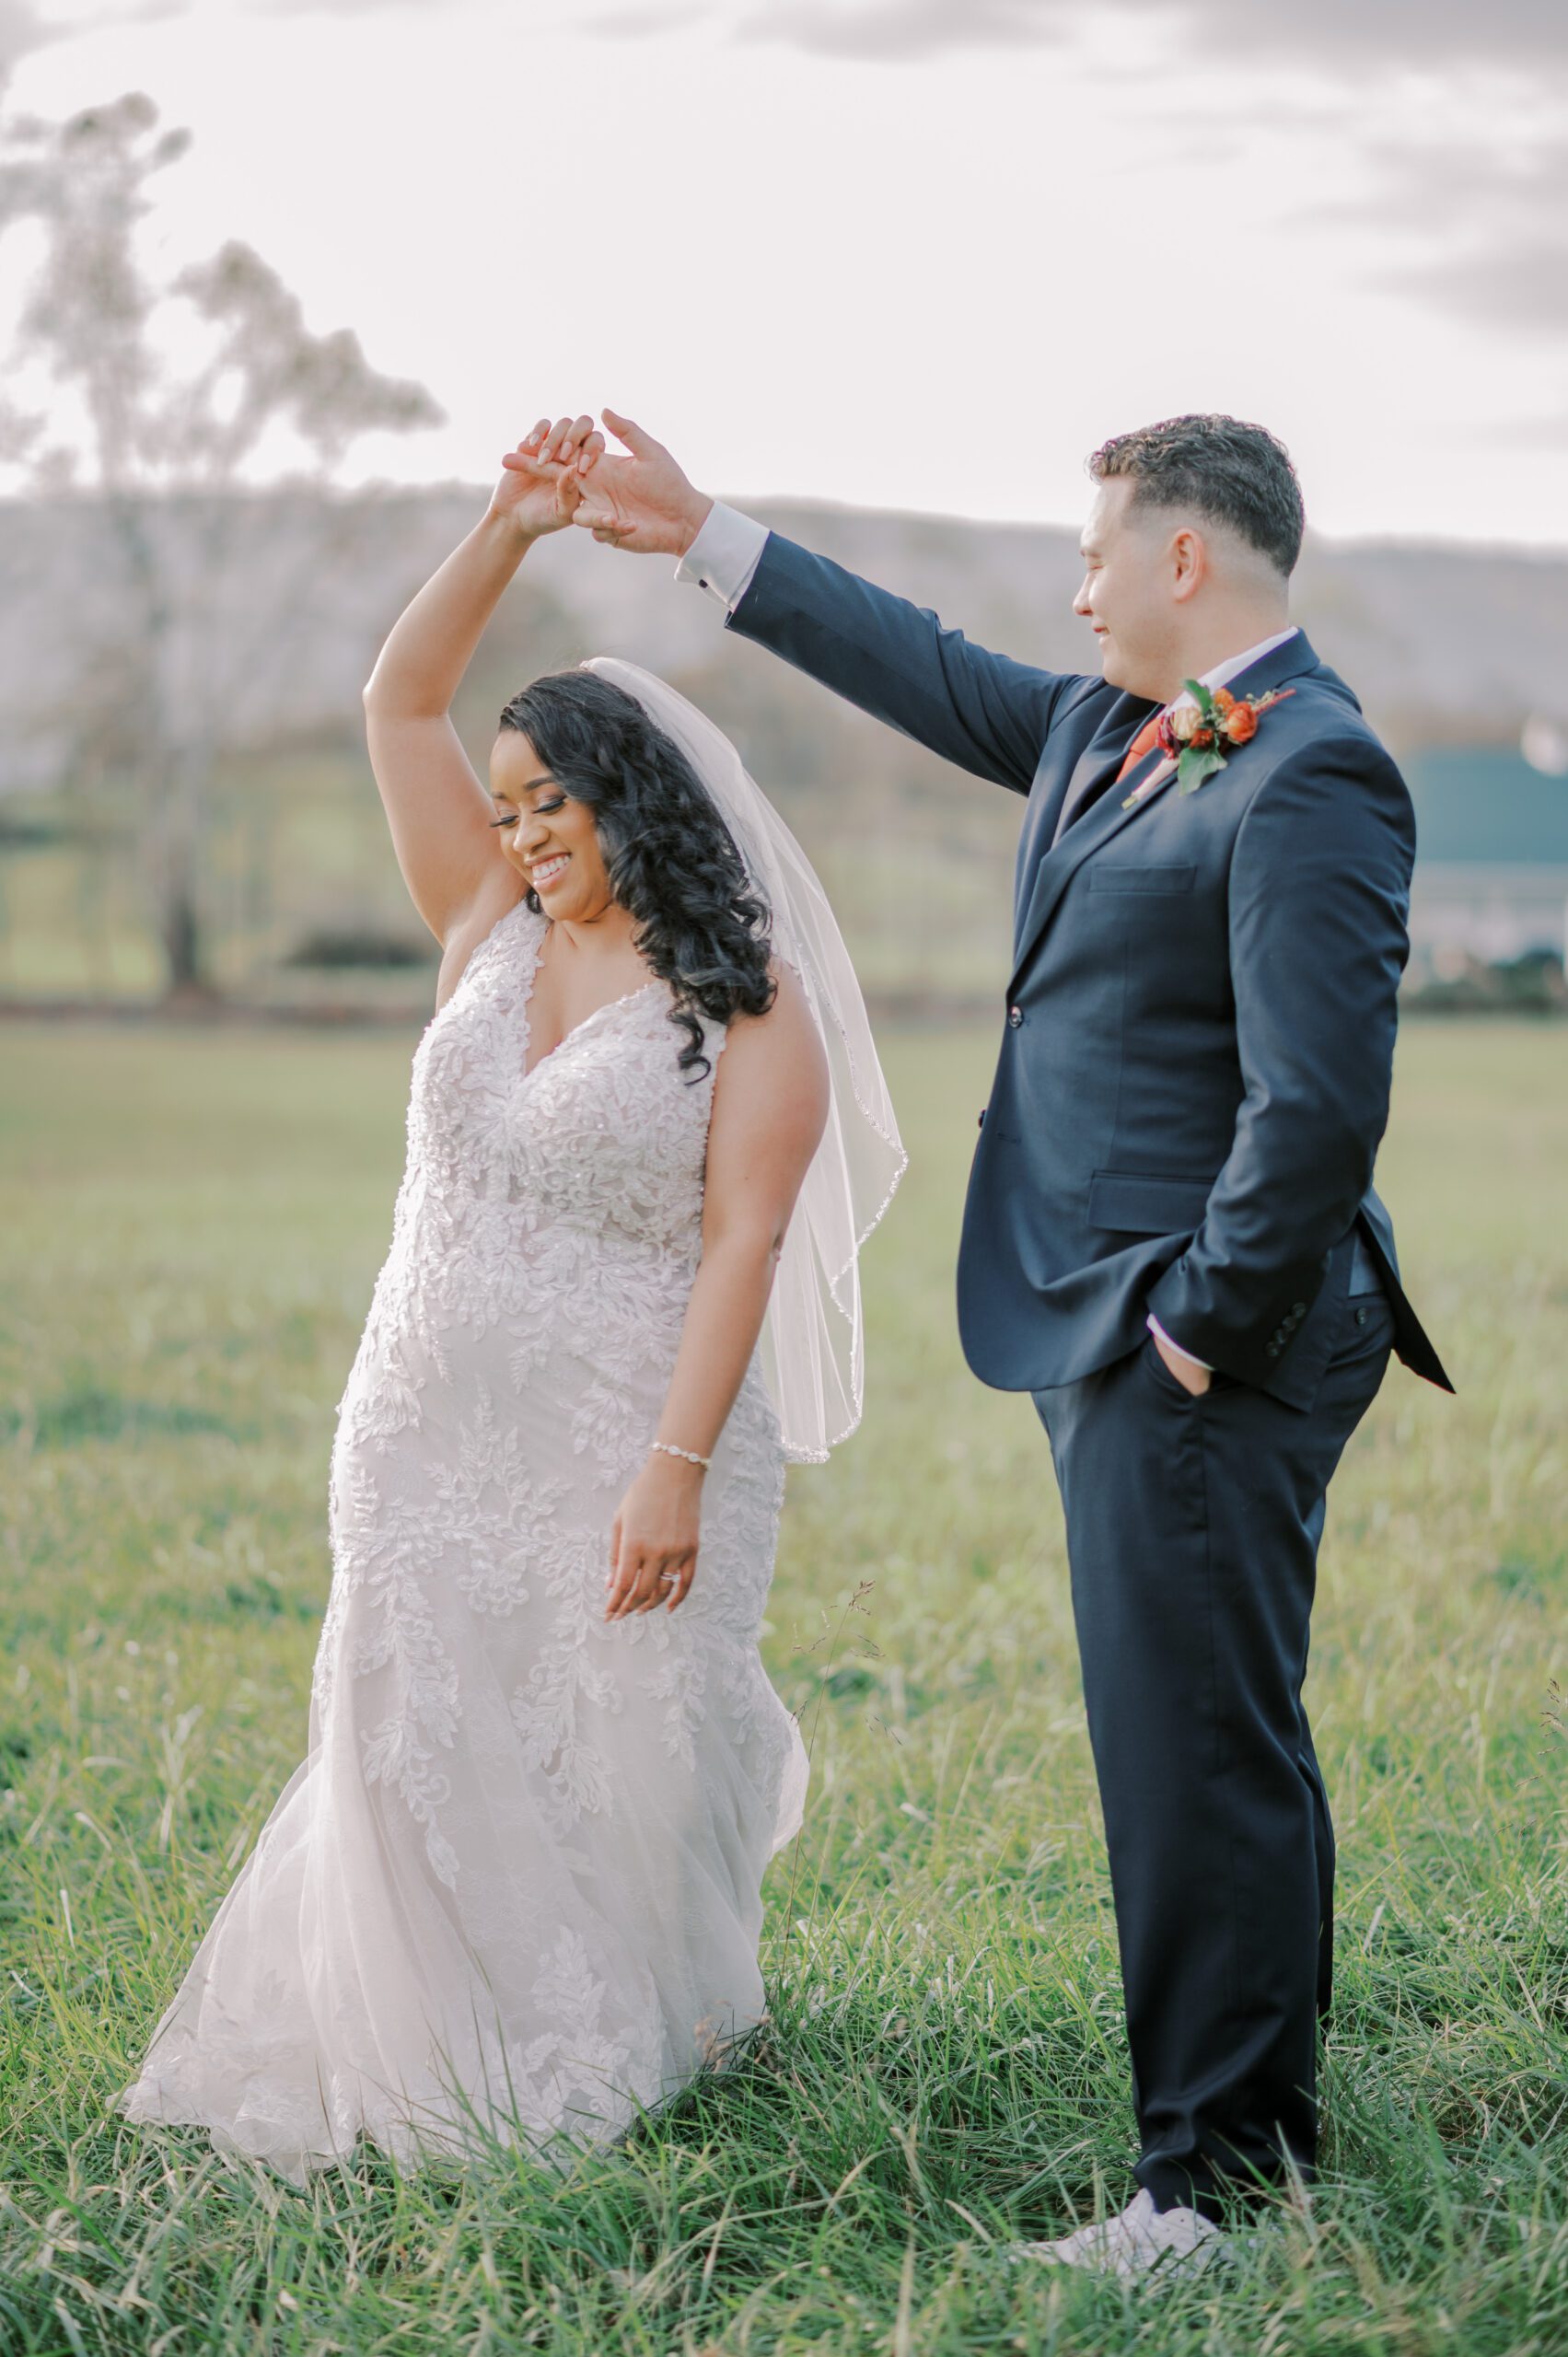 Couple dancing outside in the grass, groom spinning bride around, smiles on both their faces